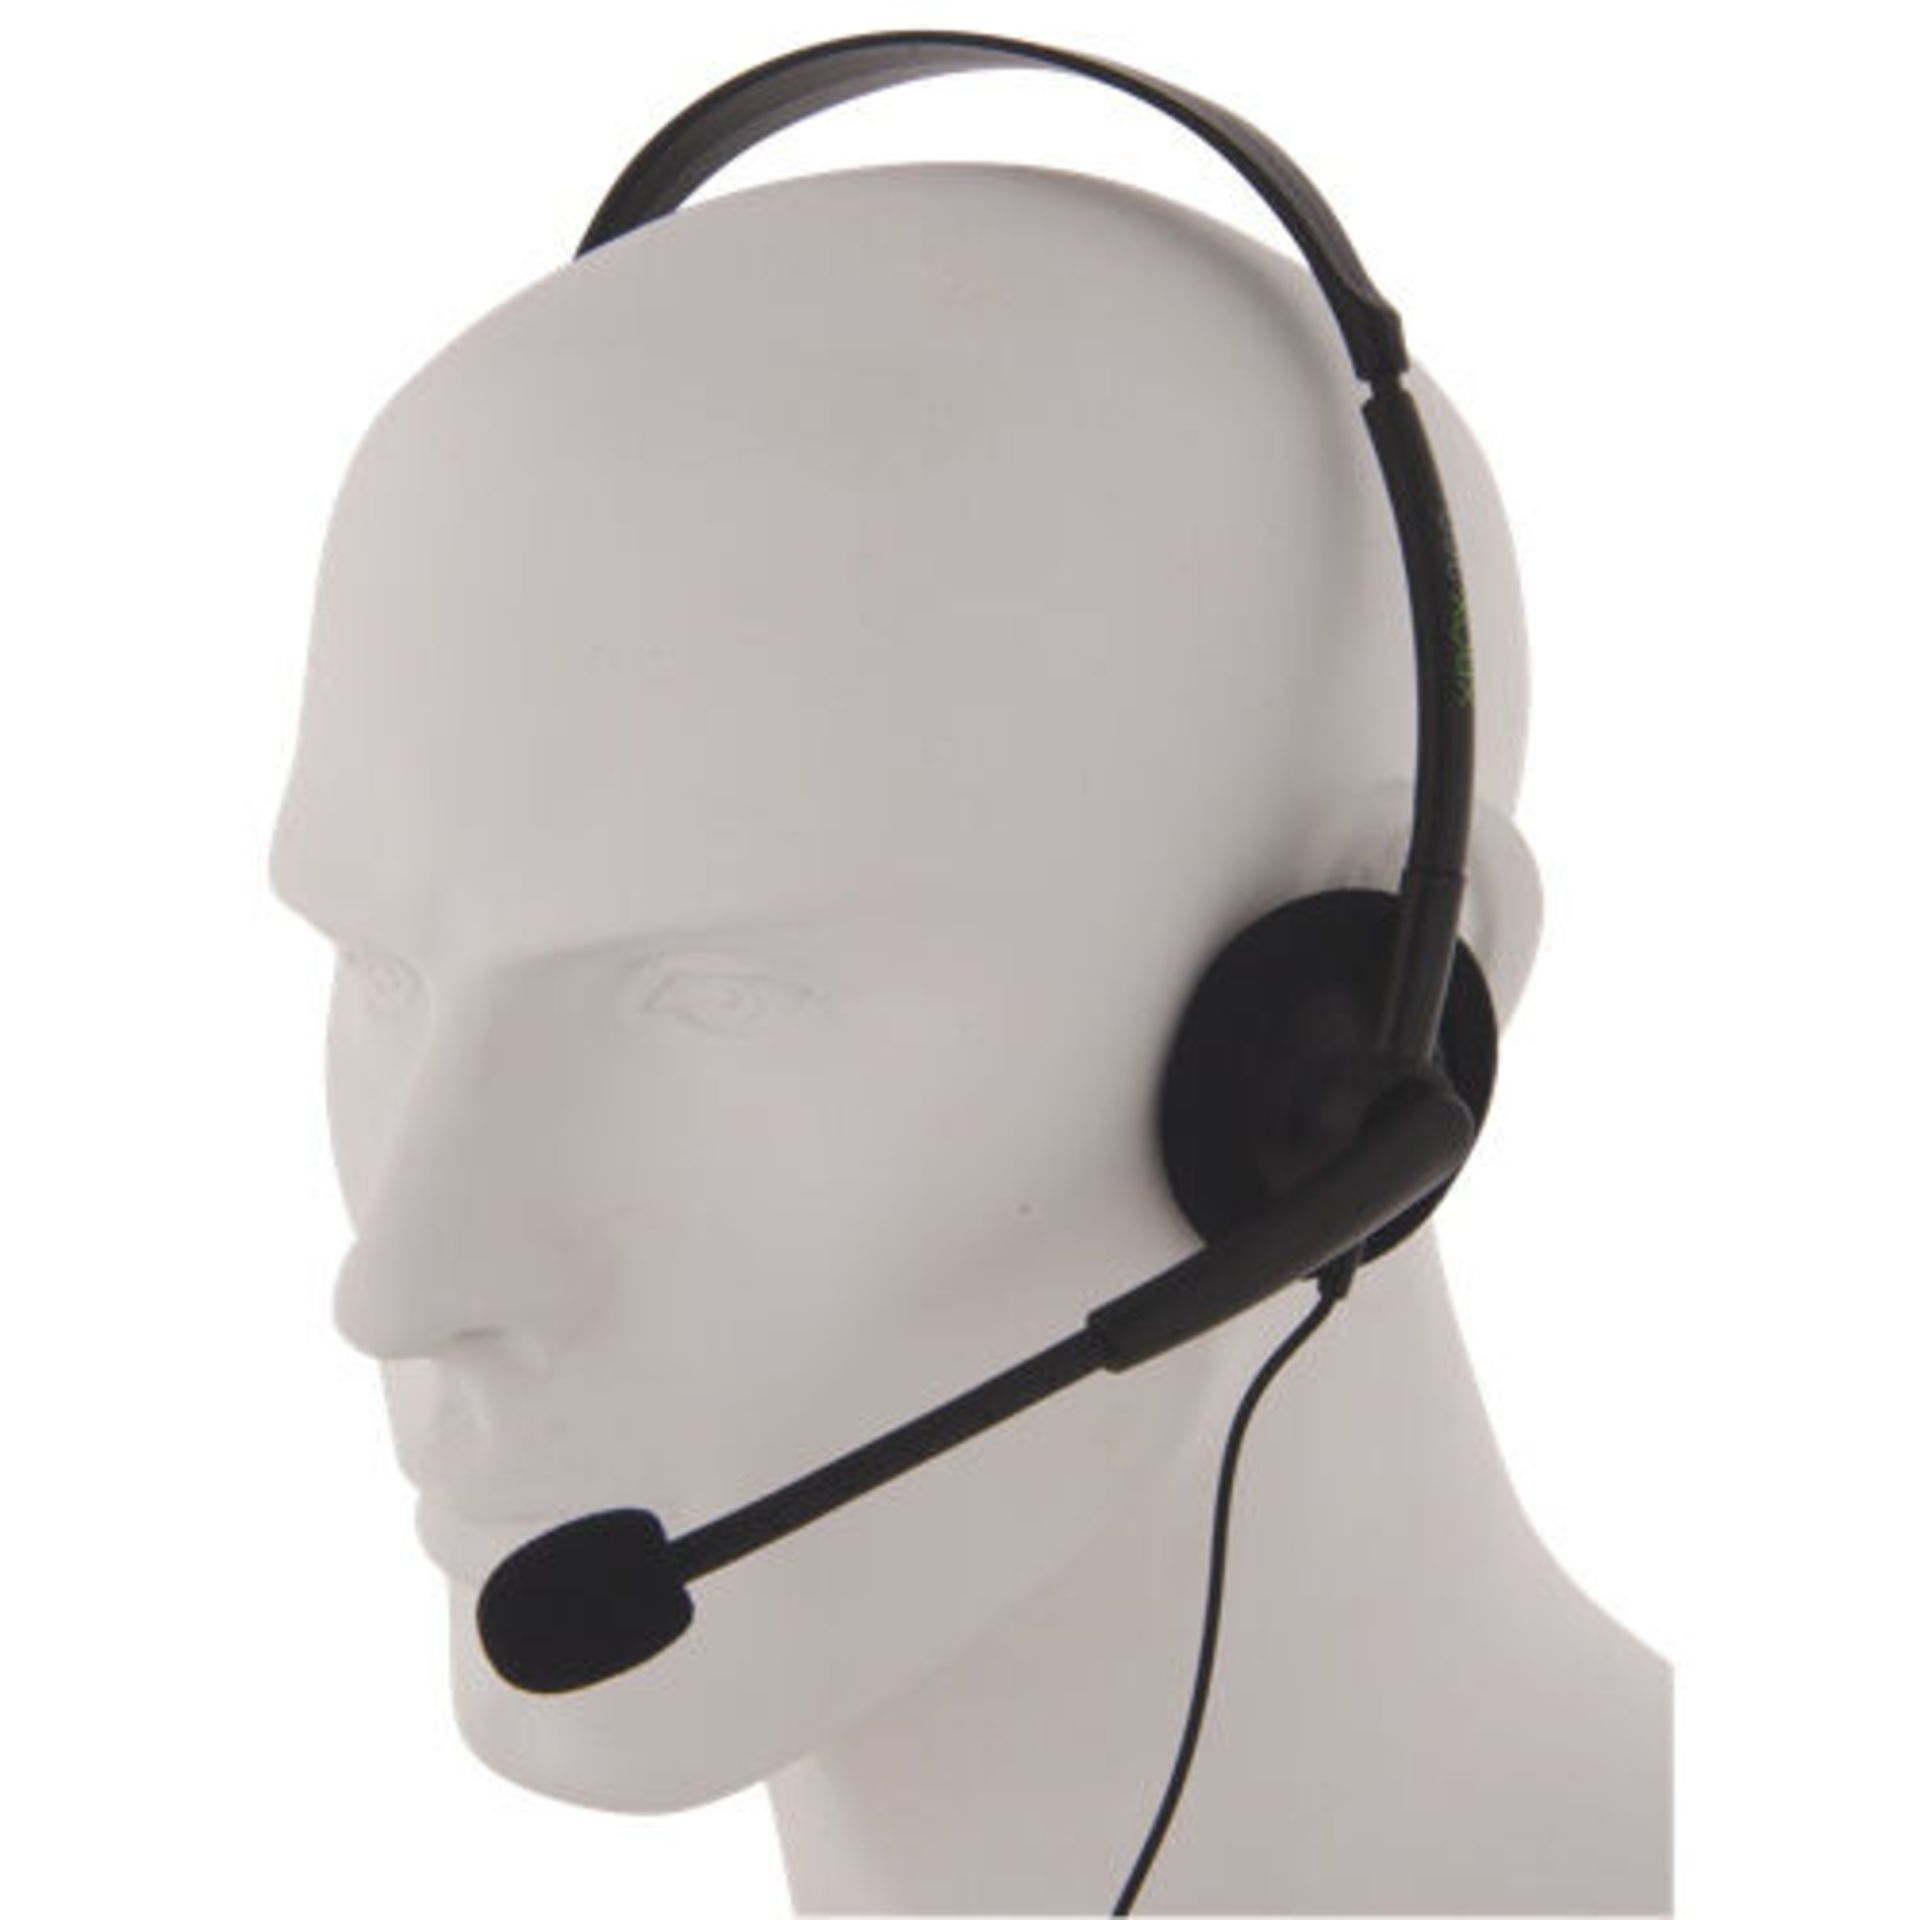 JOBLOT 100 X NEW OFFICIAL XBOX LIVE ONLINE CHAT HEADSET WITH MIC GAMING HEADPHONES 2.5MM AUX - Image 4 of 7